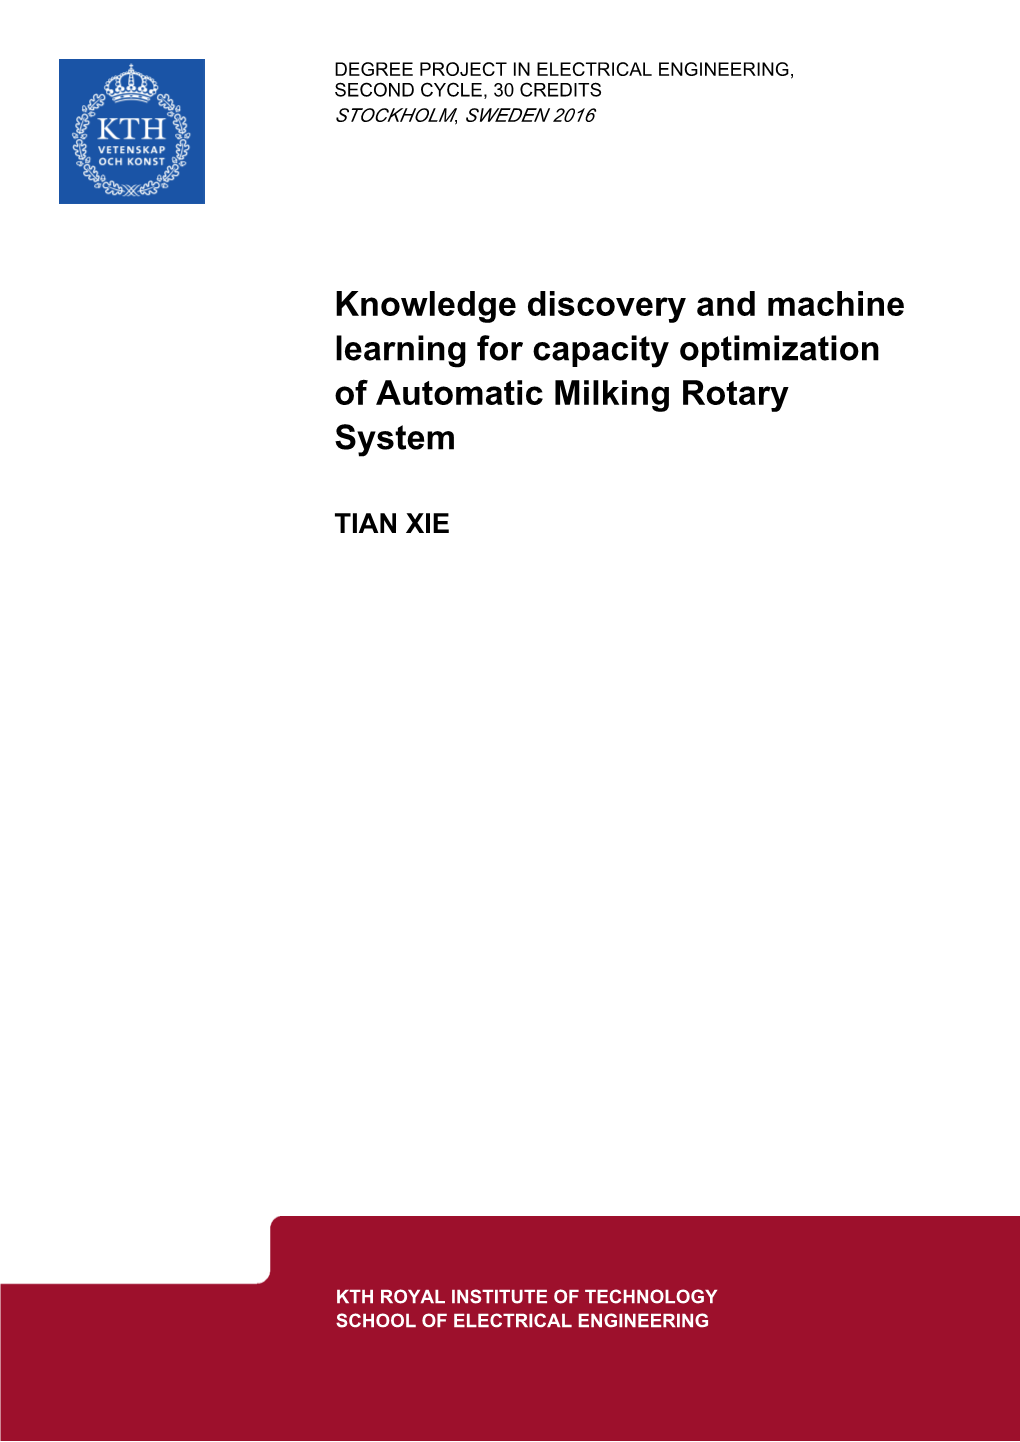 Knowledge Discovery and Machine Learning for Capacity Optimization of Automatic Milking Rotary System